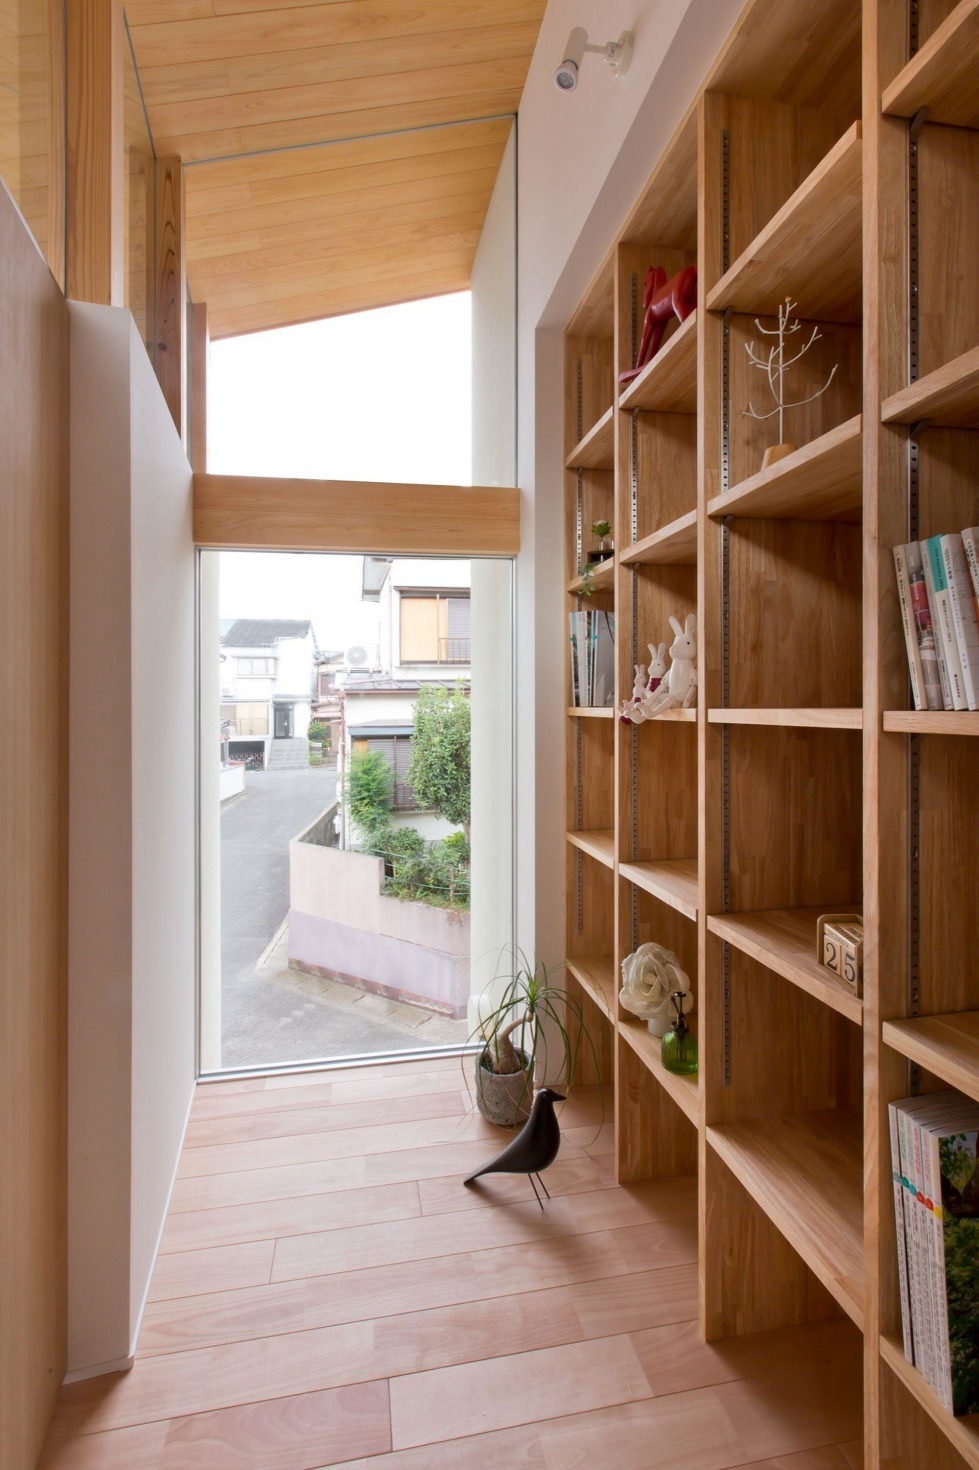 The House In Nipponese Minimalism In Kyoto By ALTS Design Office 9